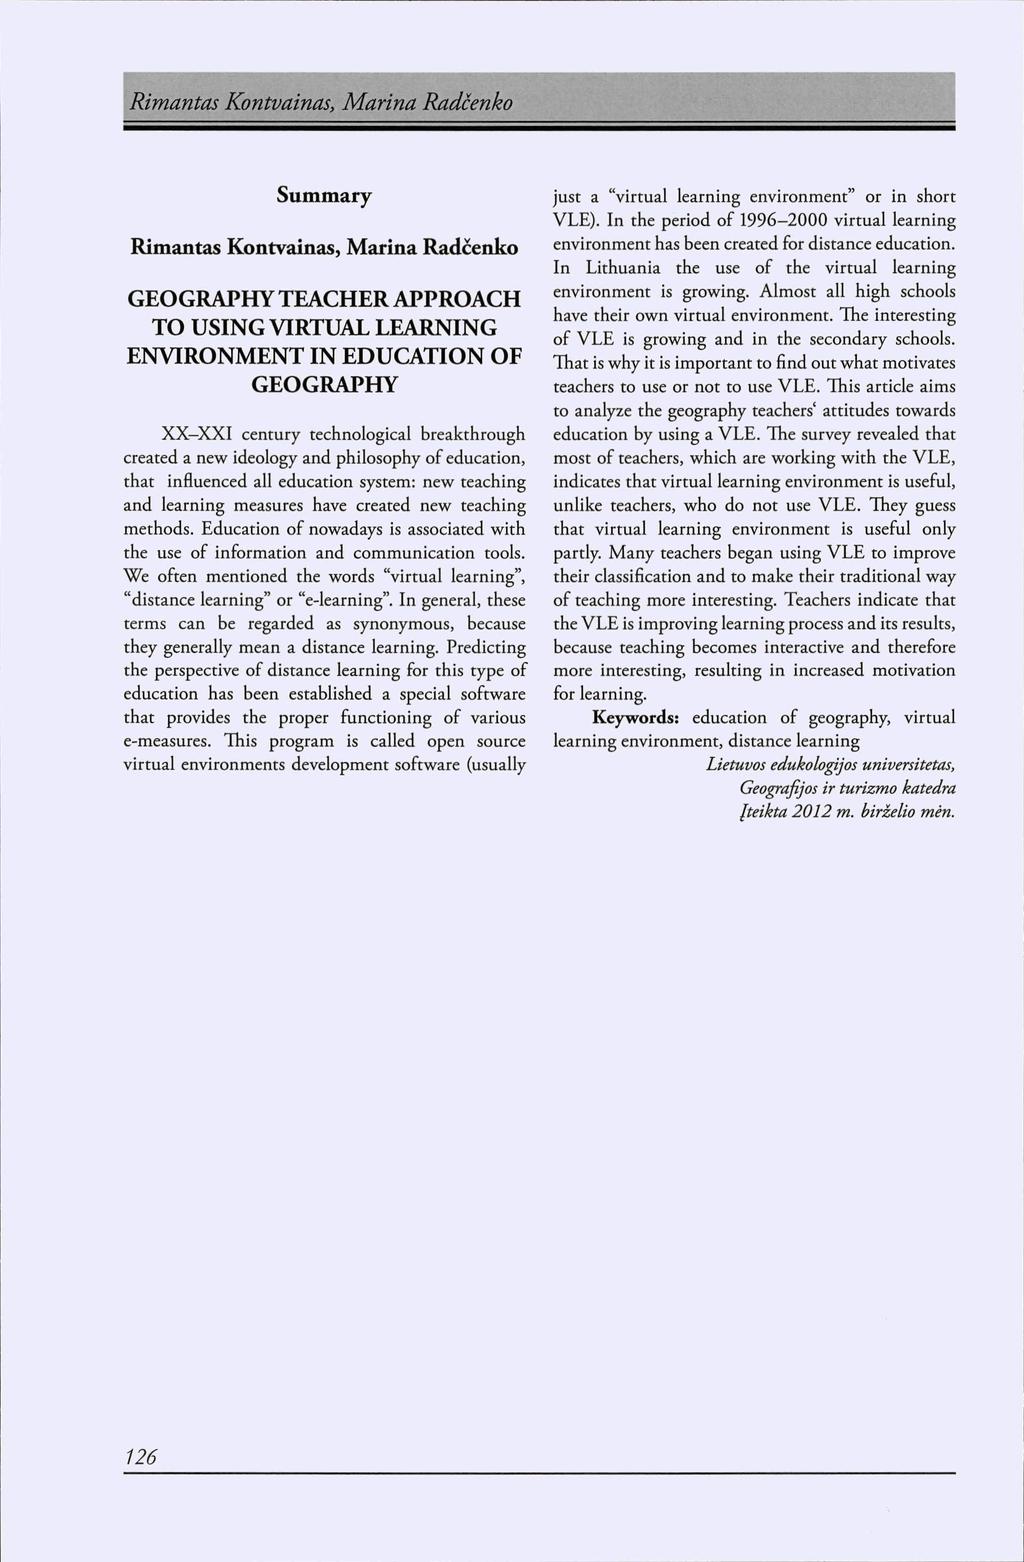 Summary Rimantas Kontvainas, Marina Radcenko GEOGRAPHY TEACHER APPROACH TO USING VIRTUAL LEARNING ENVIRONMENT IN EDUCATION OF GEOGRAPHY XX-XXI century technological breakthrough created a new